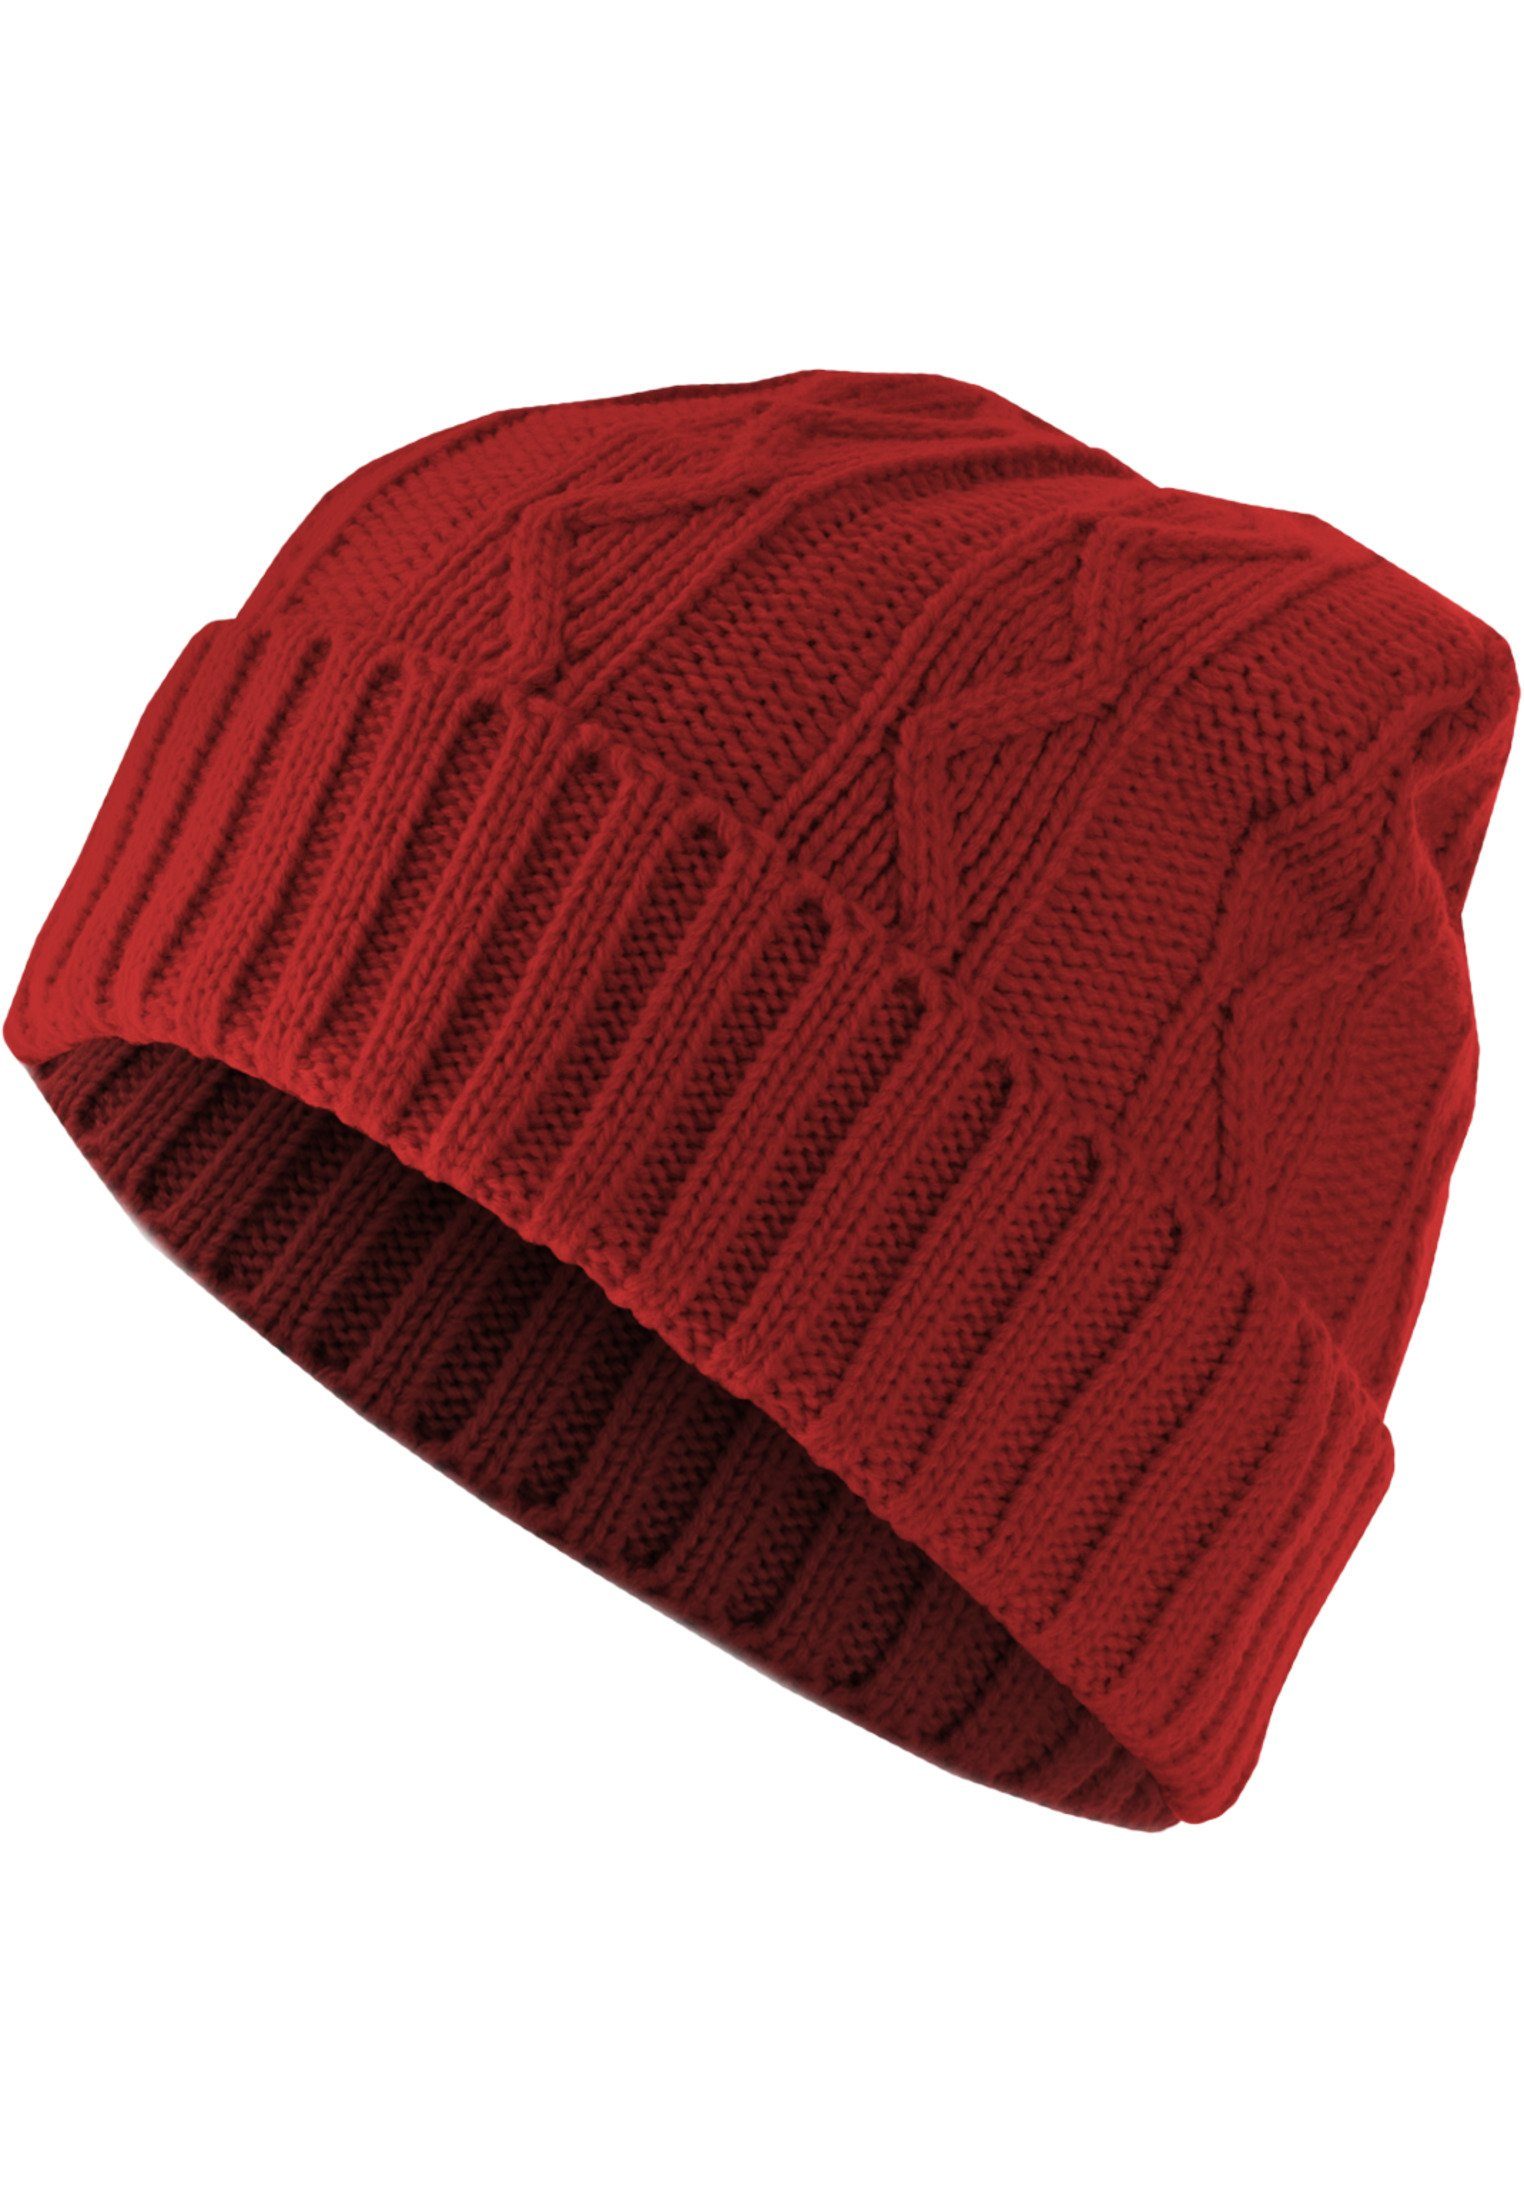 Beanie Cable red Flap MSTRDS (1-St) Accessoires Beanie